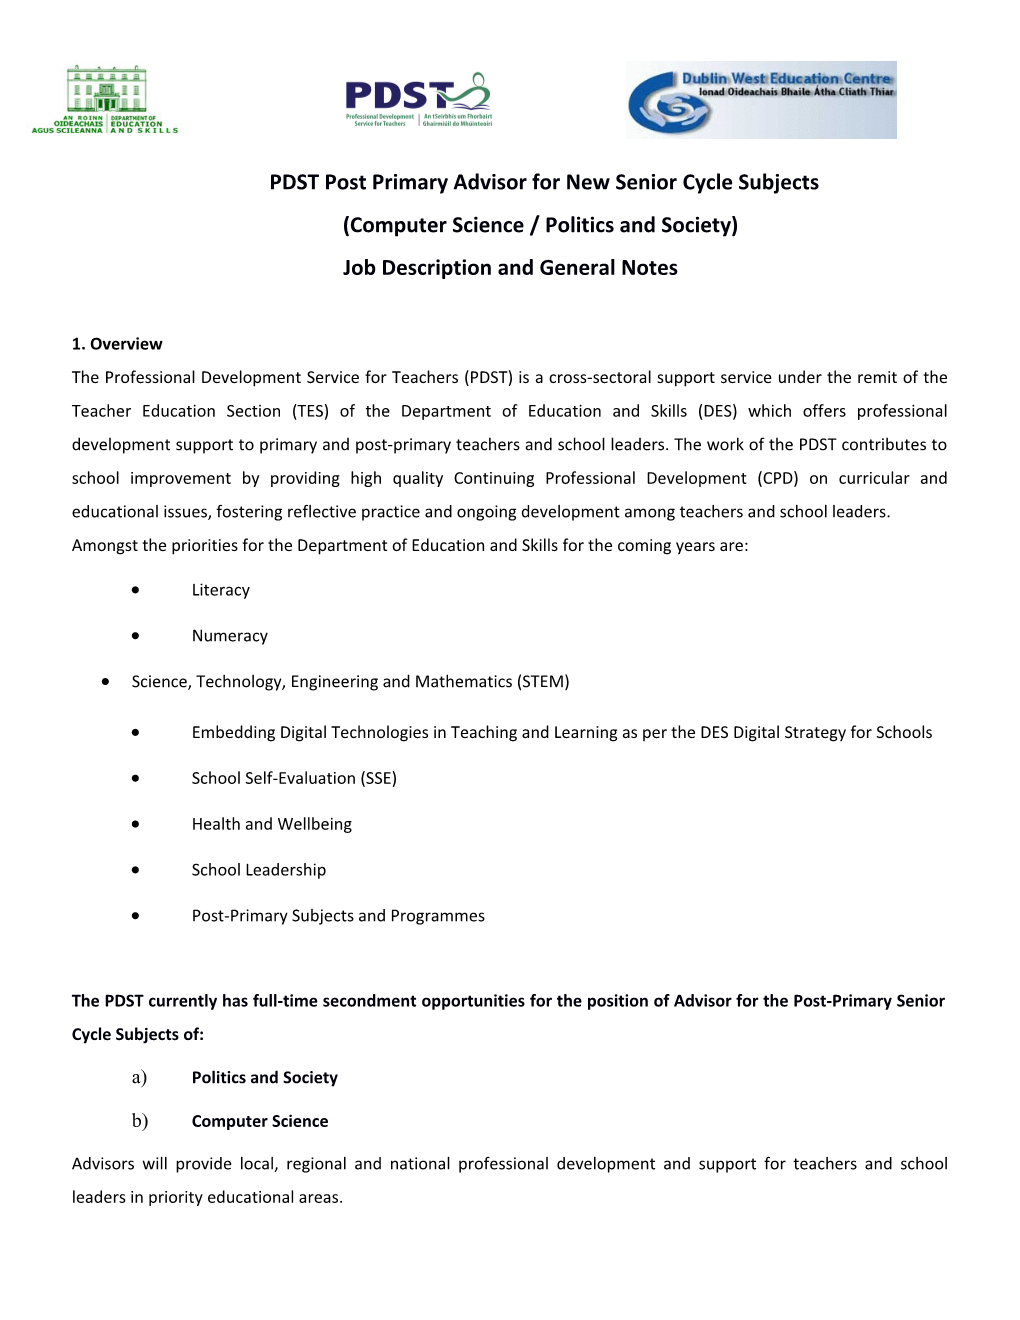 PDST Post Primary Advisor for New Senior Cycle Subjects